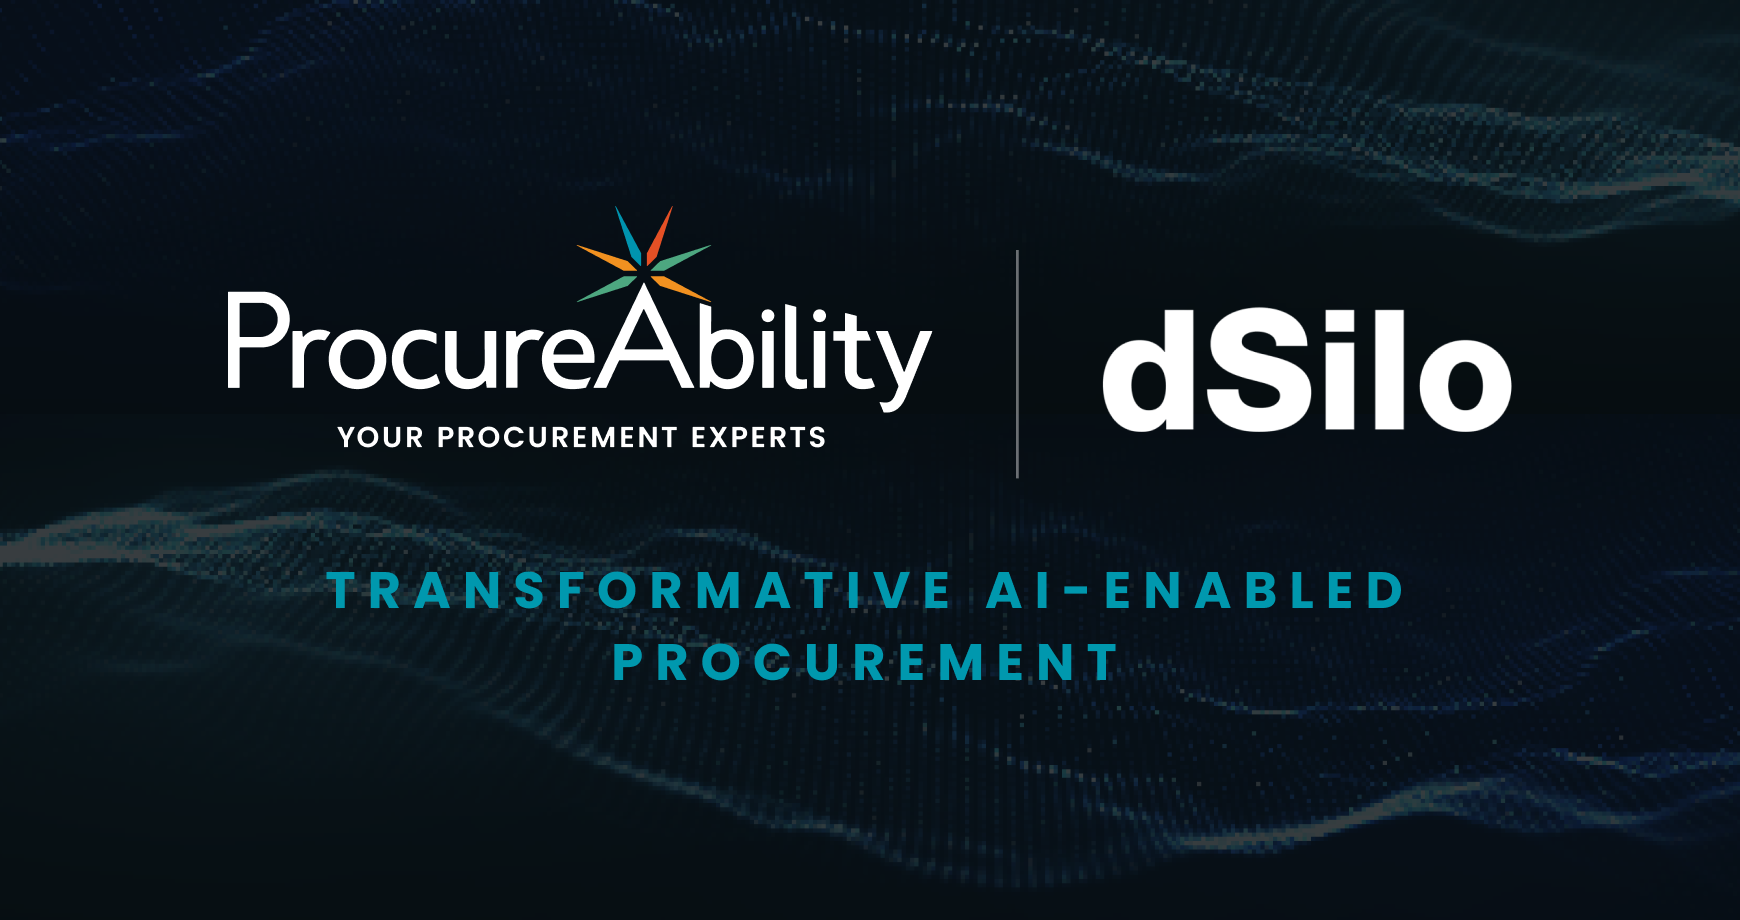 Transforming Procurement: ProcureAbility and dSilo Forge Partnership to Deliver AI-Enabled Insights and Actions That Drive Disruptive Innovation